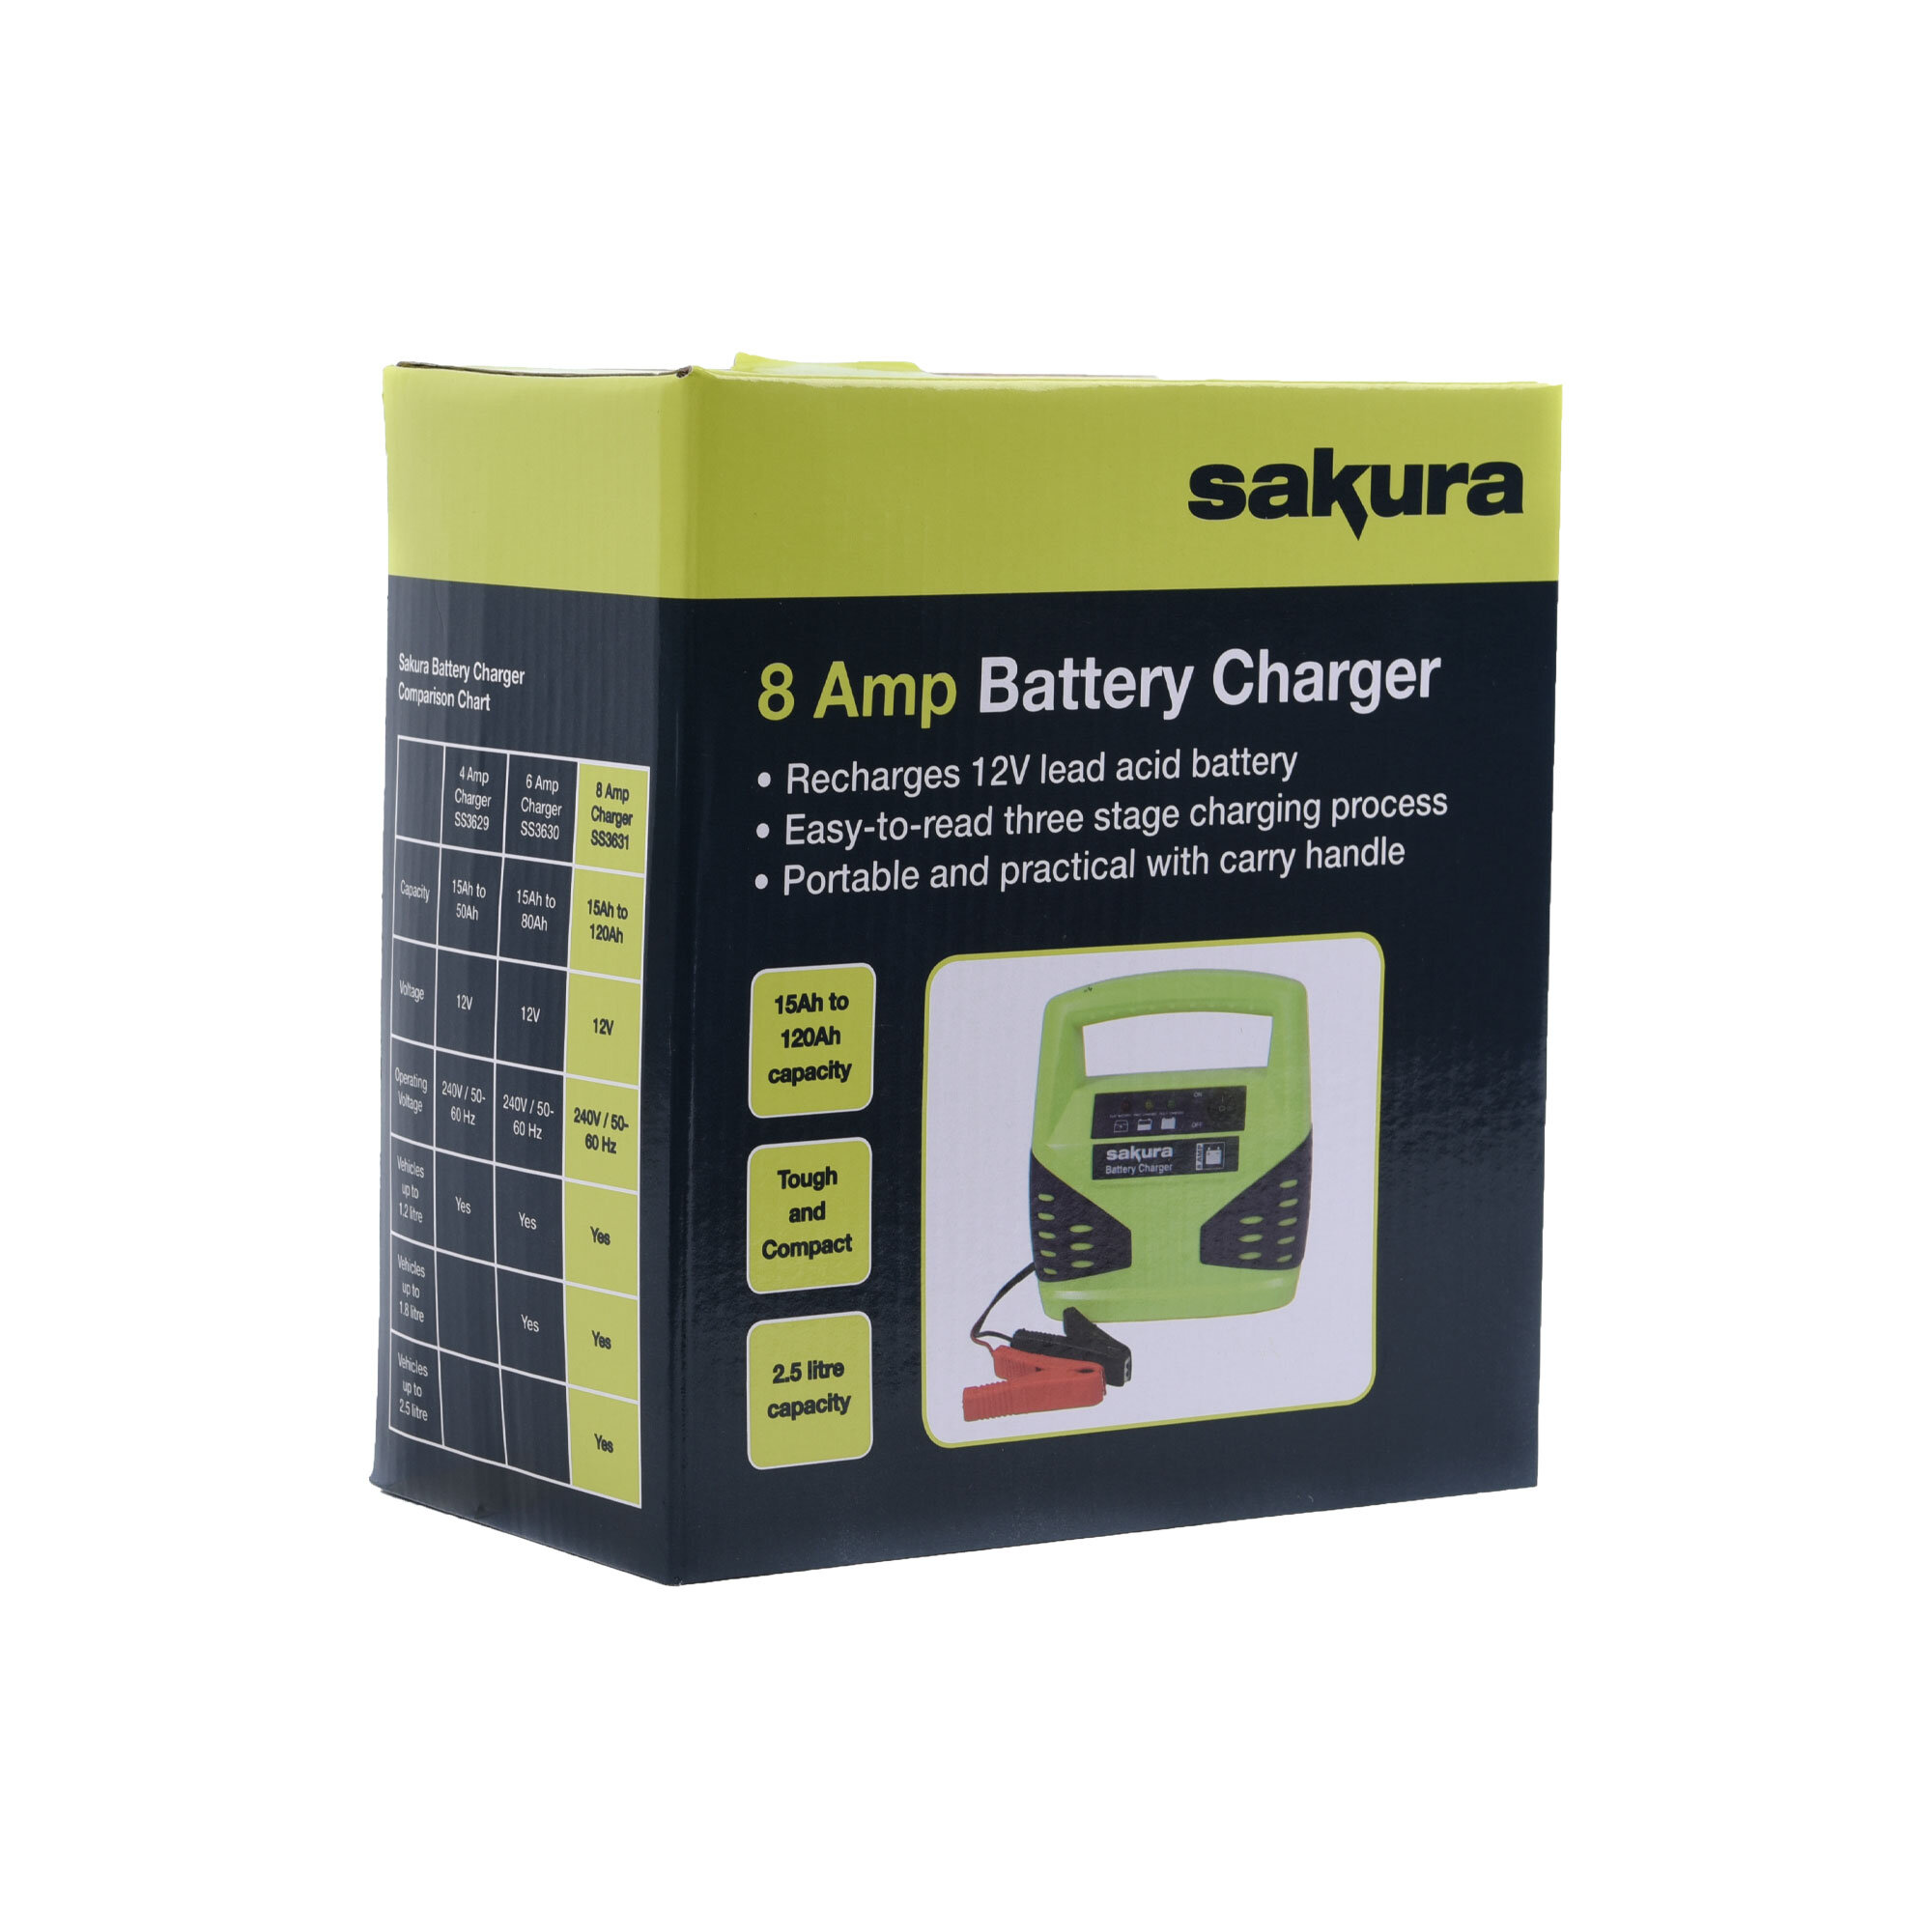 SS3631-8Amp-Charger-Packaging-Angle-2000px.jpg